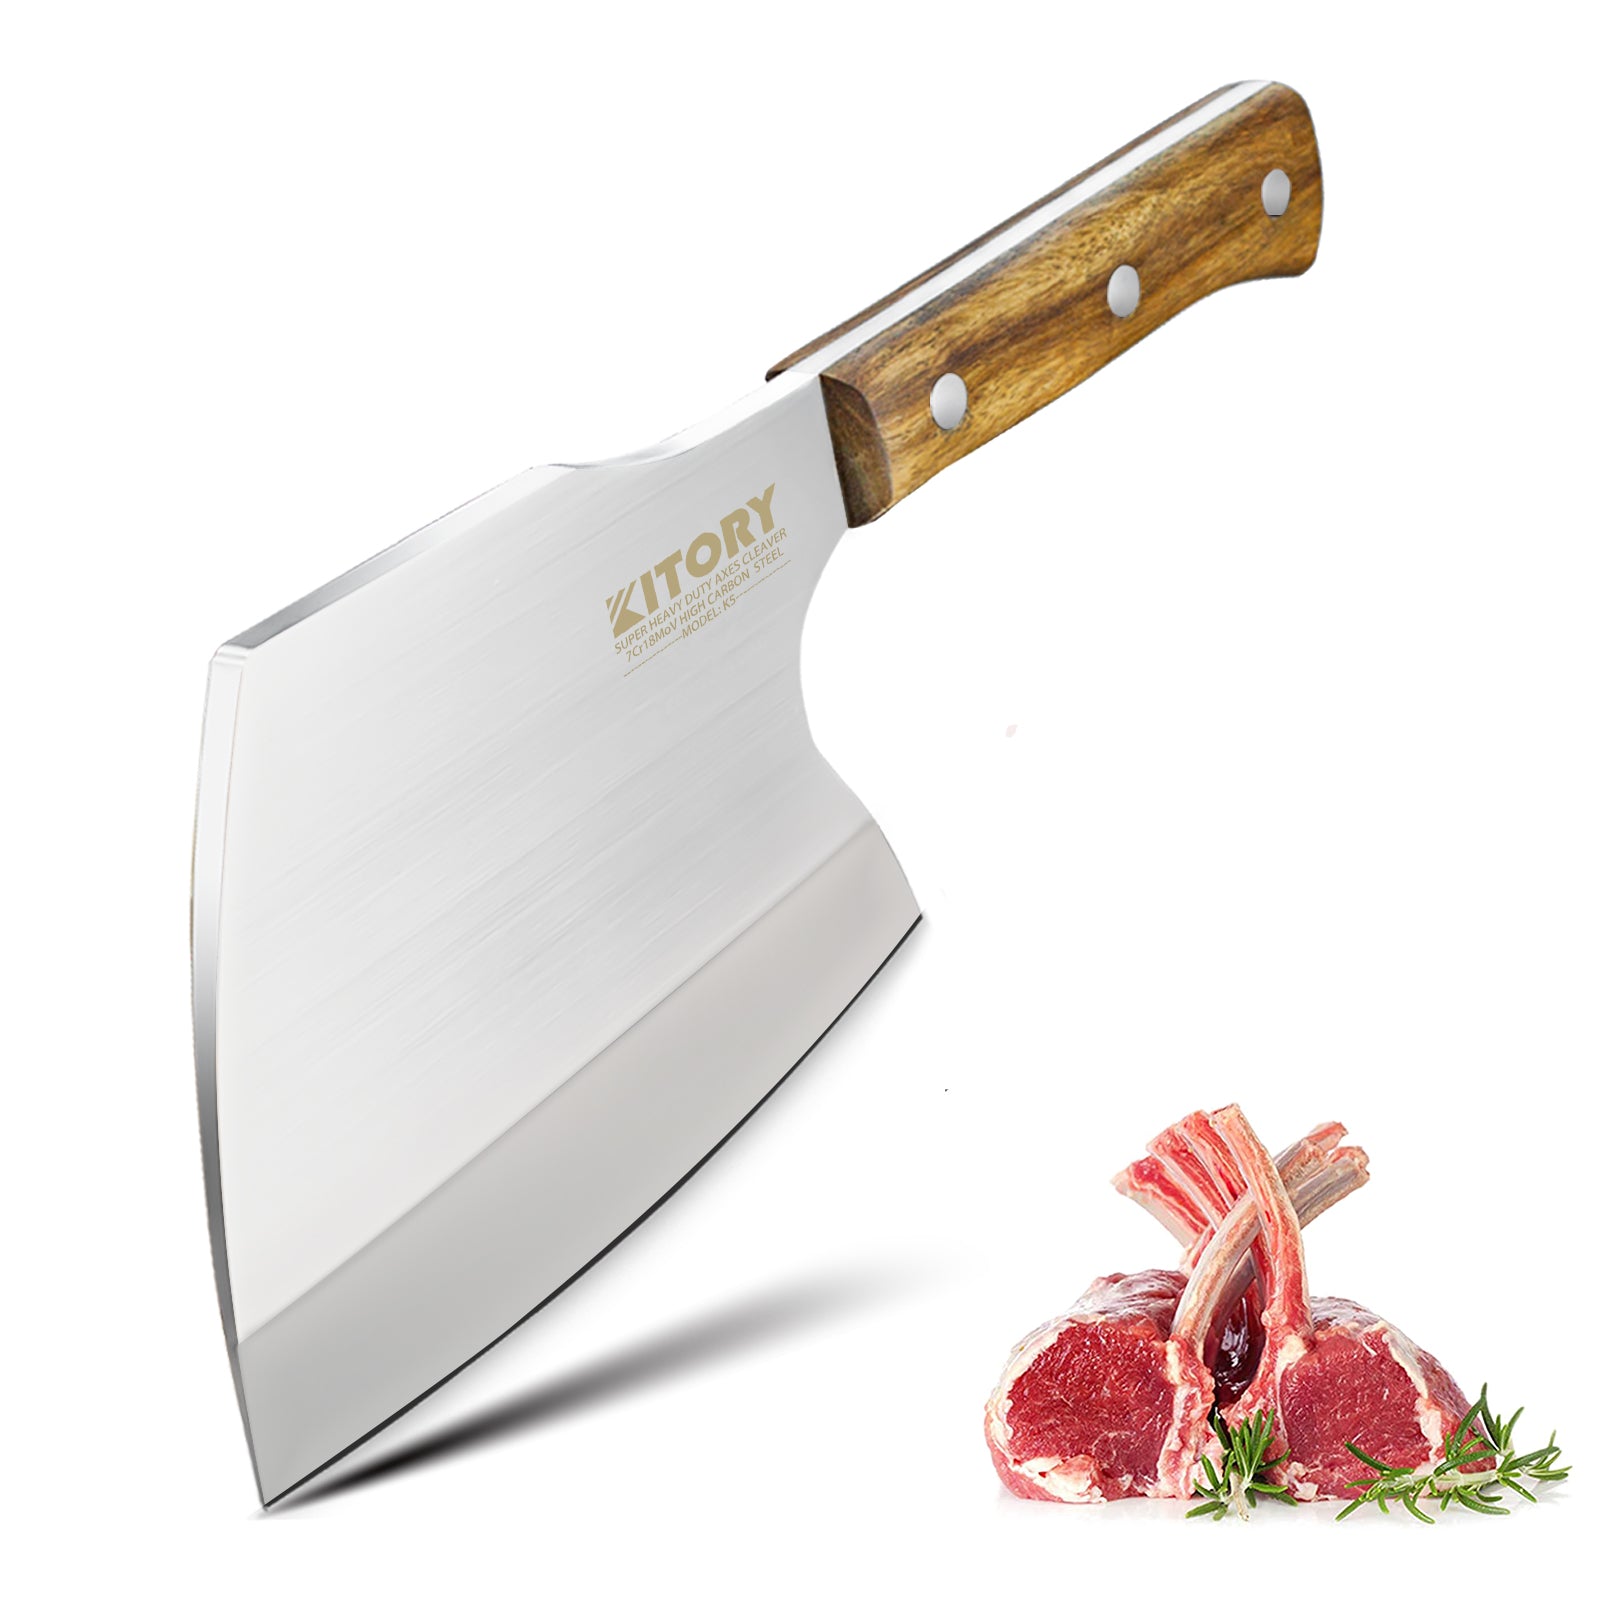 Kitory Meat Cleaver Knife 7'' Heavy Duty Meat Chopper Butcher Knife Bone  Cutter Bone Chopping Knife - Full Tang 7CR17MOV High Carbon Stainless Steel  